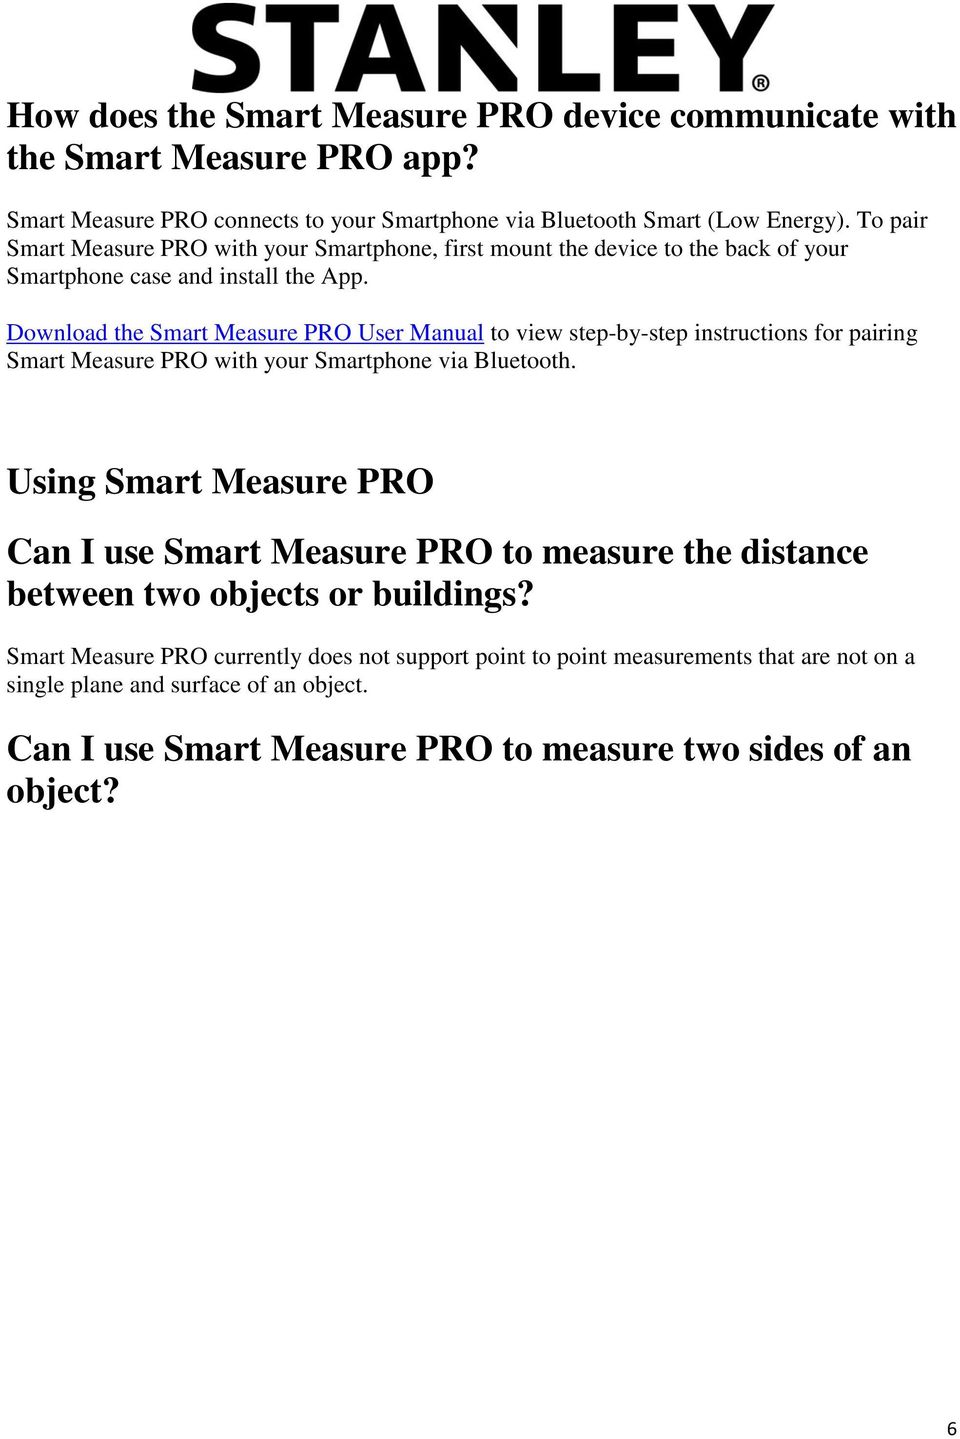 Download the Smart Measure PRO User Manual to view step-by-step instructions for pairing Smart Measure PRO with your Smartphone via Bluetooth.